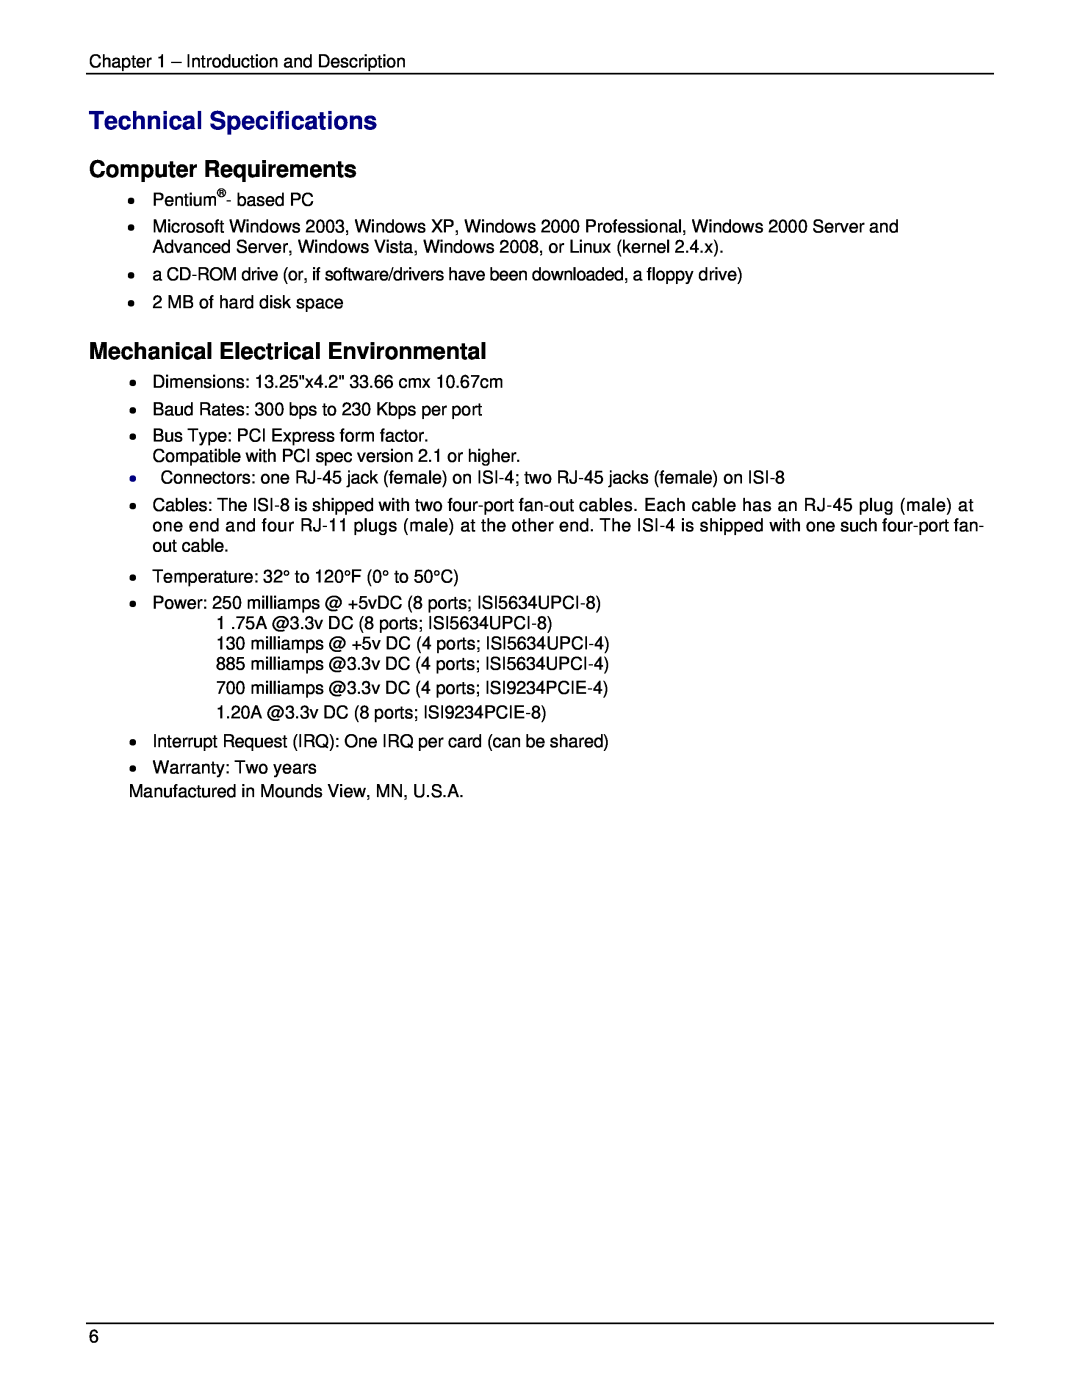 Multi-Tech Systems ISI5634UPCI manual Technical Specifications, Computer Requirements, Mechanical Electrical Environmental 